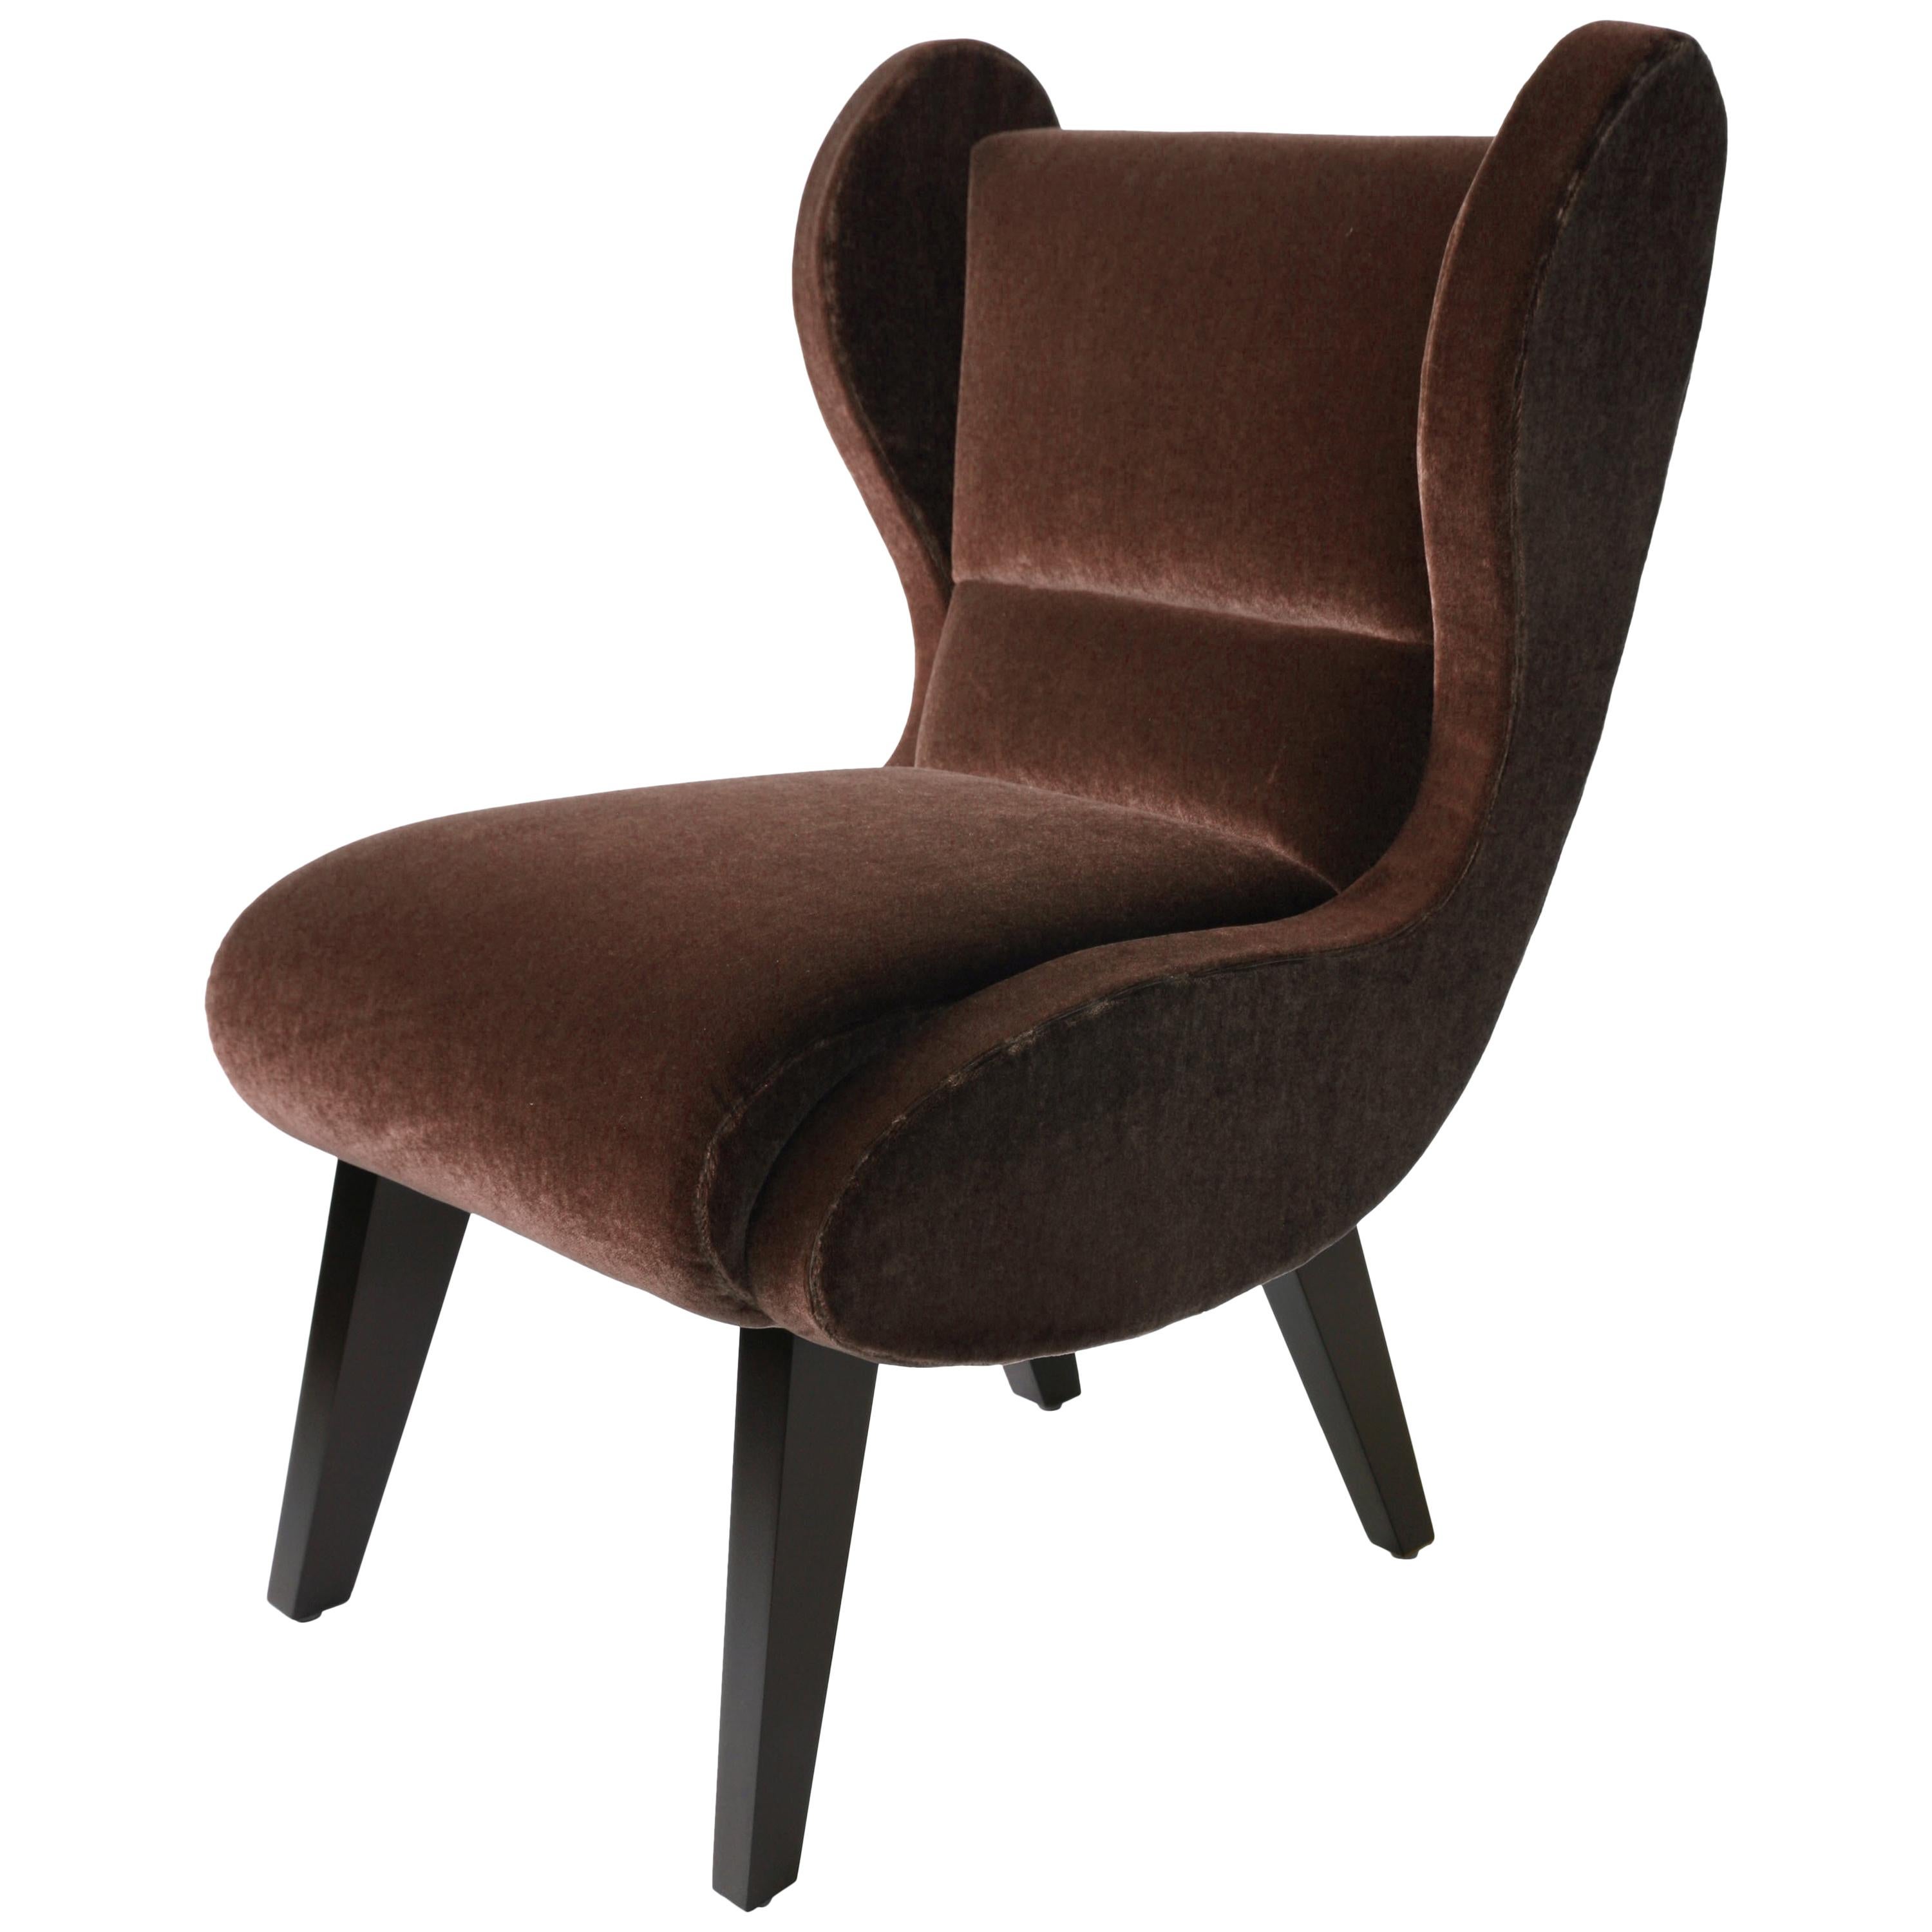 Wingback Lounge Chair for PortHouse, Mohair + Maple, Jordan Mozer USA, C. 2003 For Sale